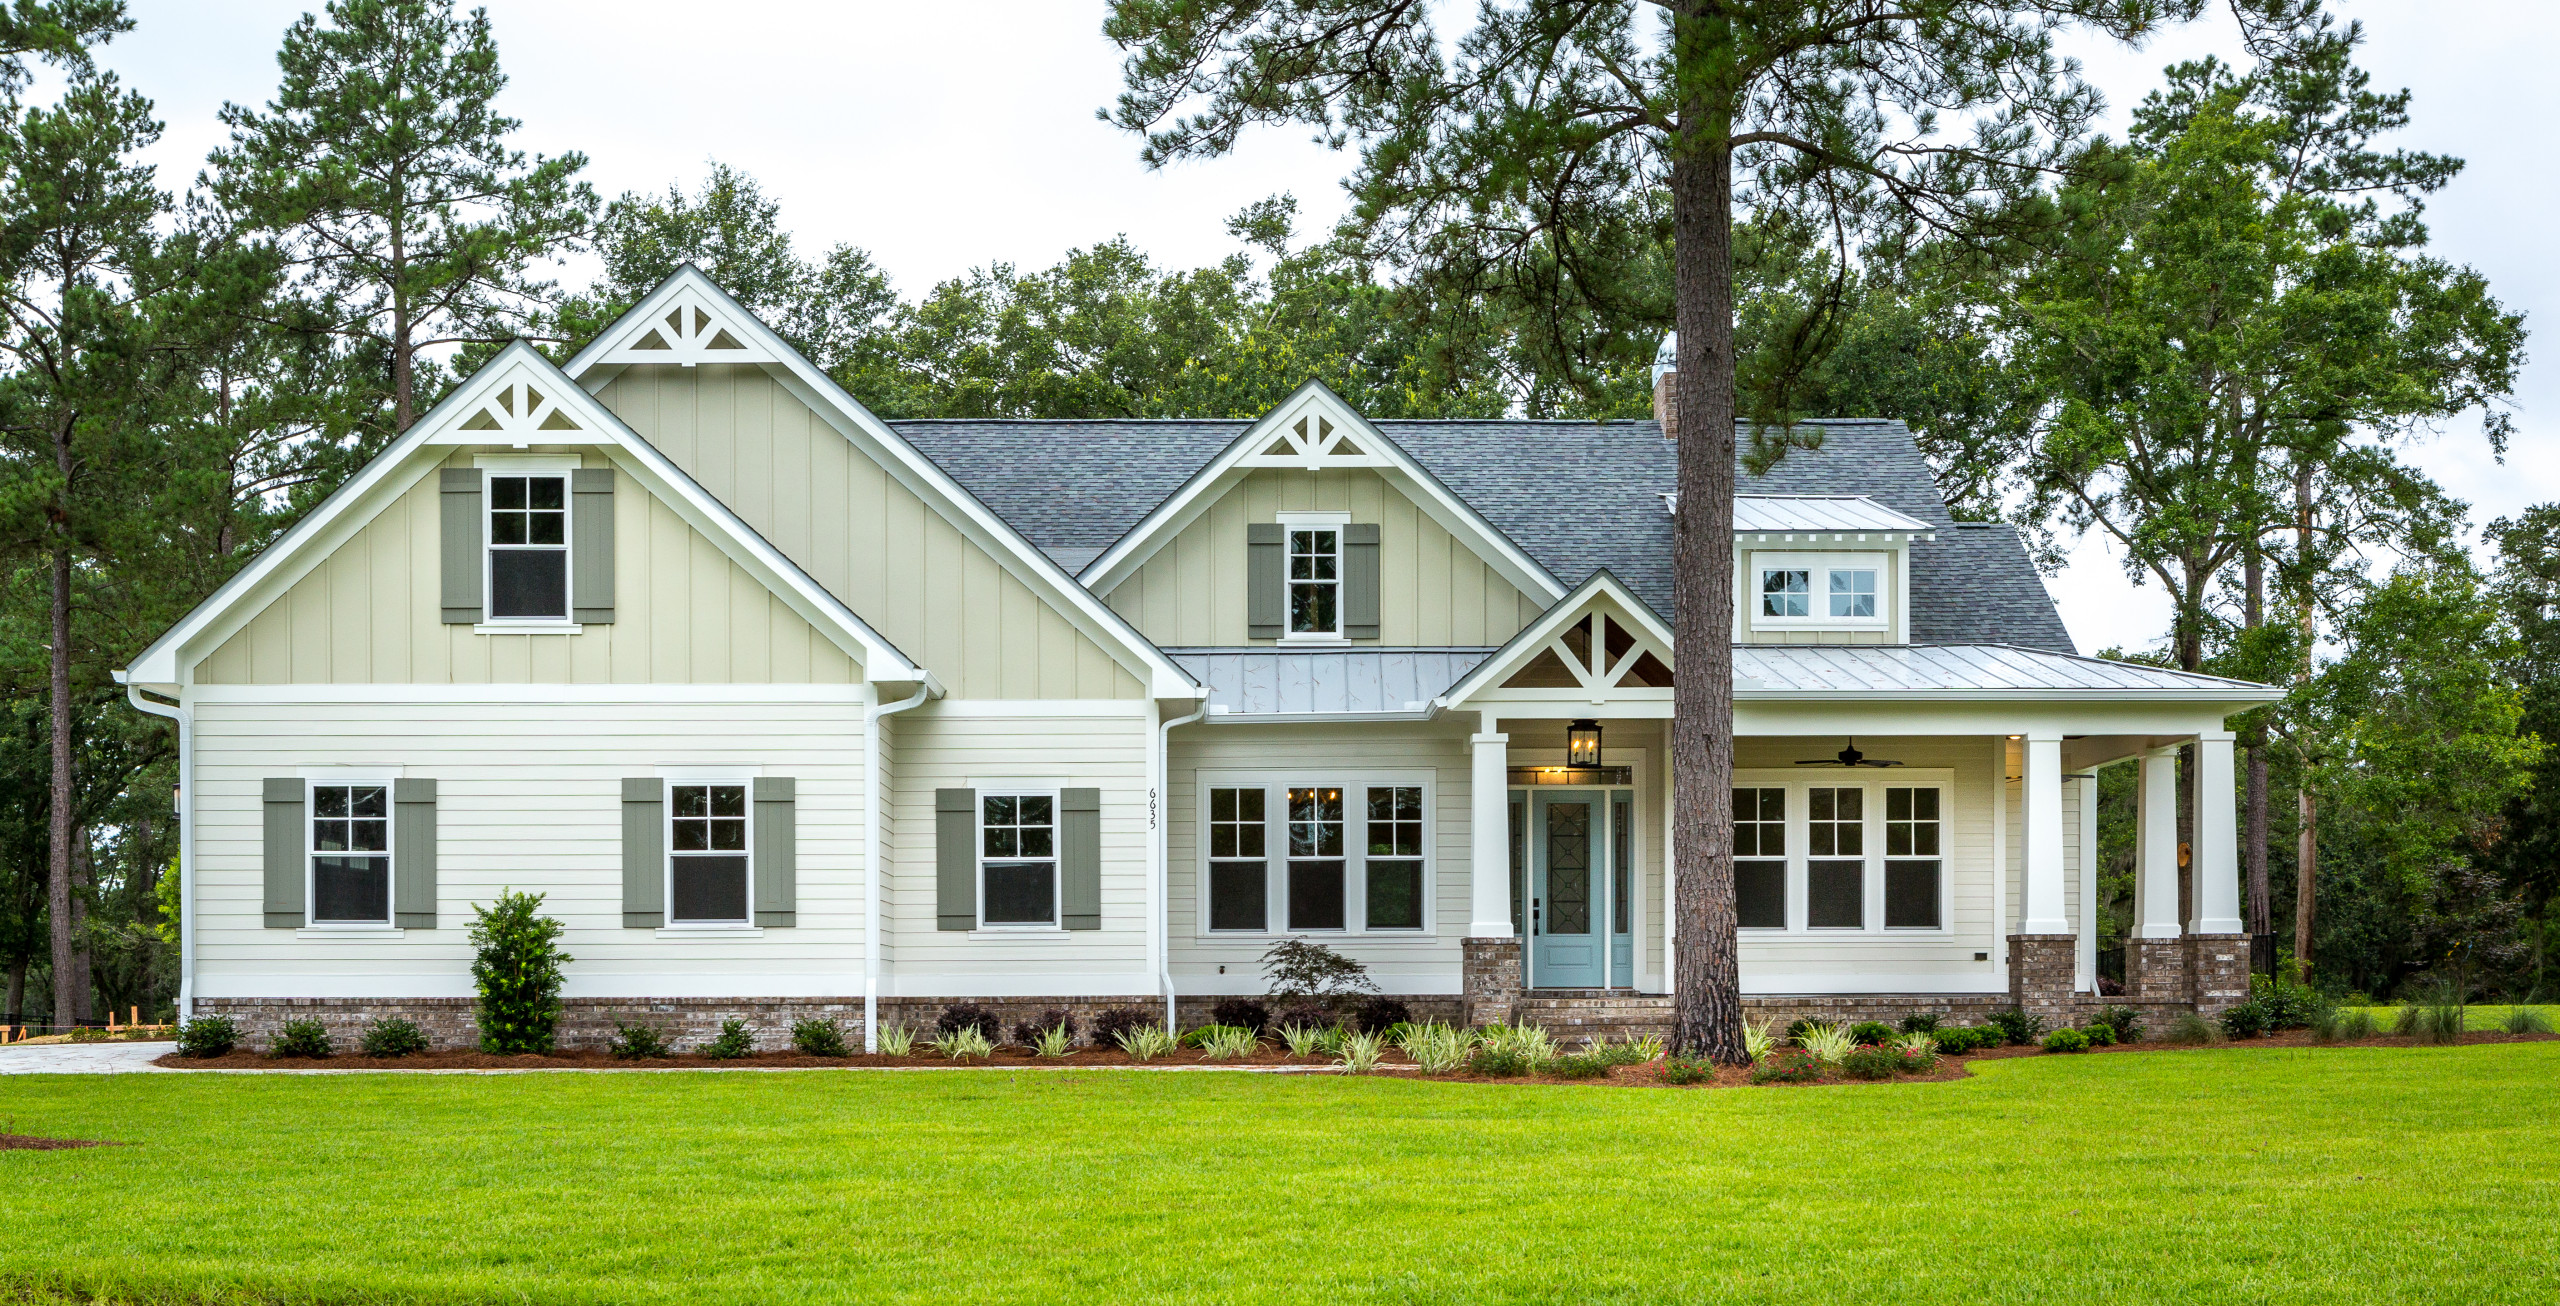 18 Magnificent Farmhouse Exterior Designs That Will Warm Your Heart